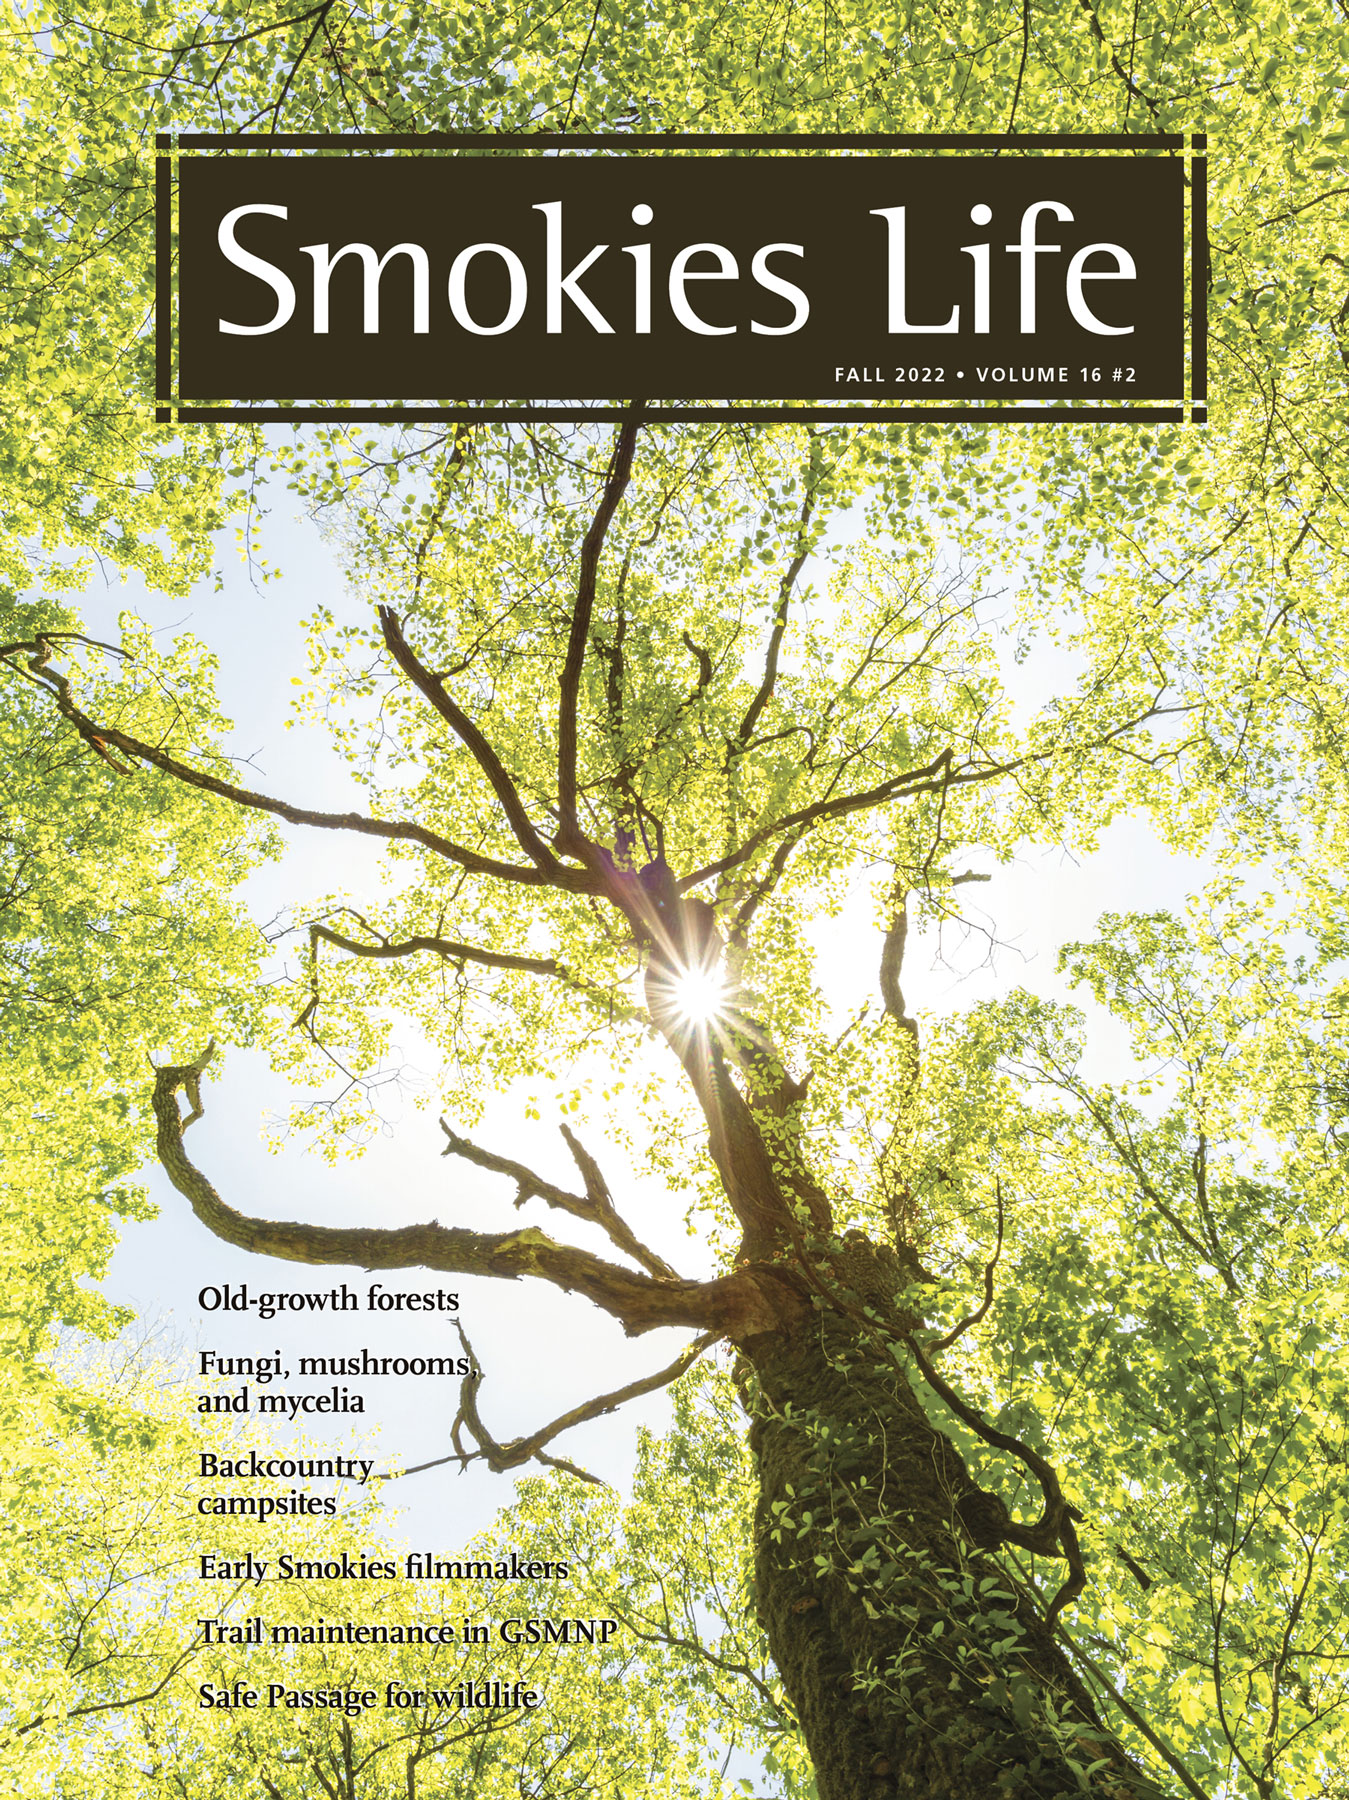 The cover story of the fall 2022 issue of Smokies Life is written by Steve Kemp and titled The Last Best Wildwoods: Scientists (and even politicians) keep revealing new wonders within a Smoky Mountain old-growth forest. Image courtesy of Michele Sons.